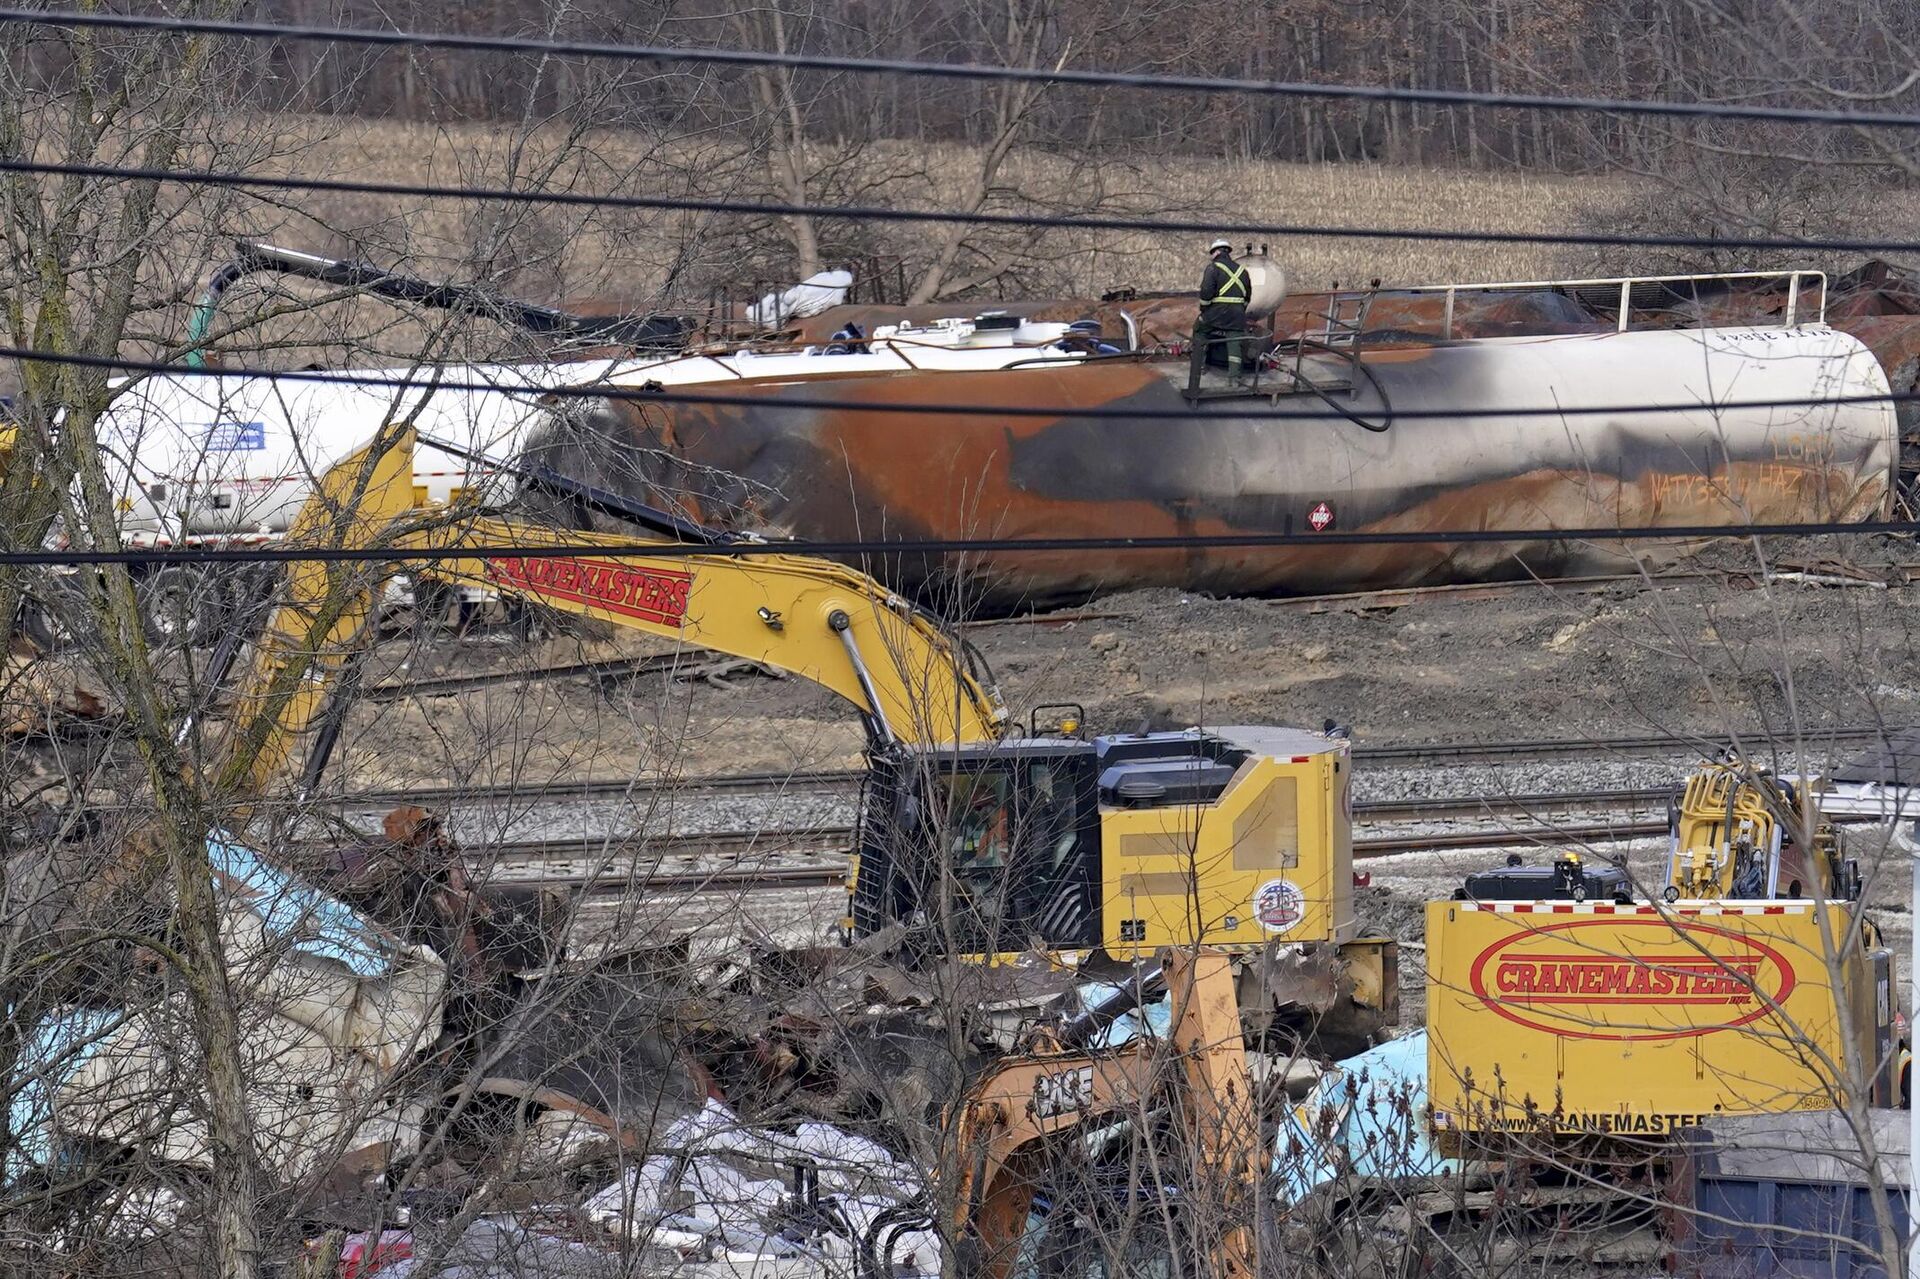 Workers continue to clean up remaining tank cars, Tuesday, Feb. 21, 2023, in East Palestine, Ohio, following the Feb. 3 Norfolk Southern freight train derailment. - Sputnik International, 1920, 16.08.2023